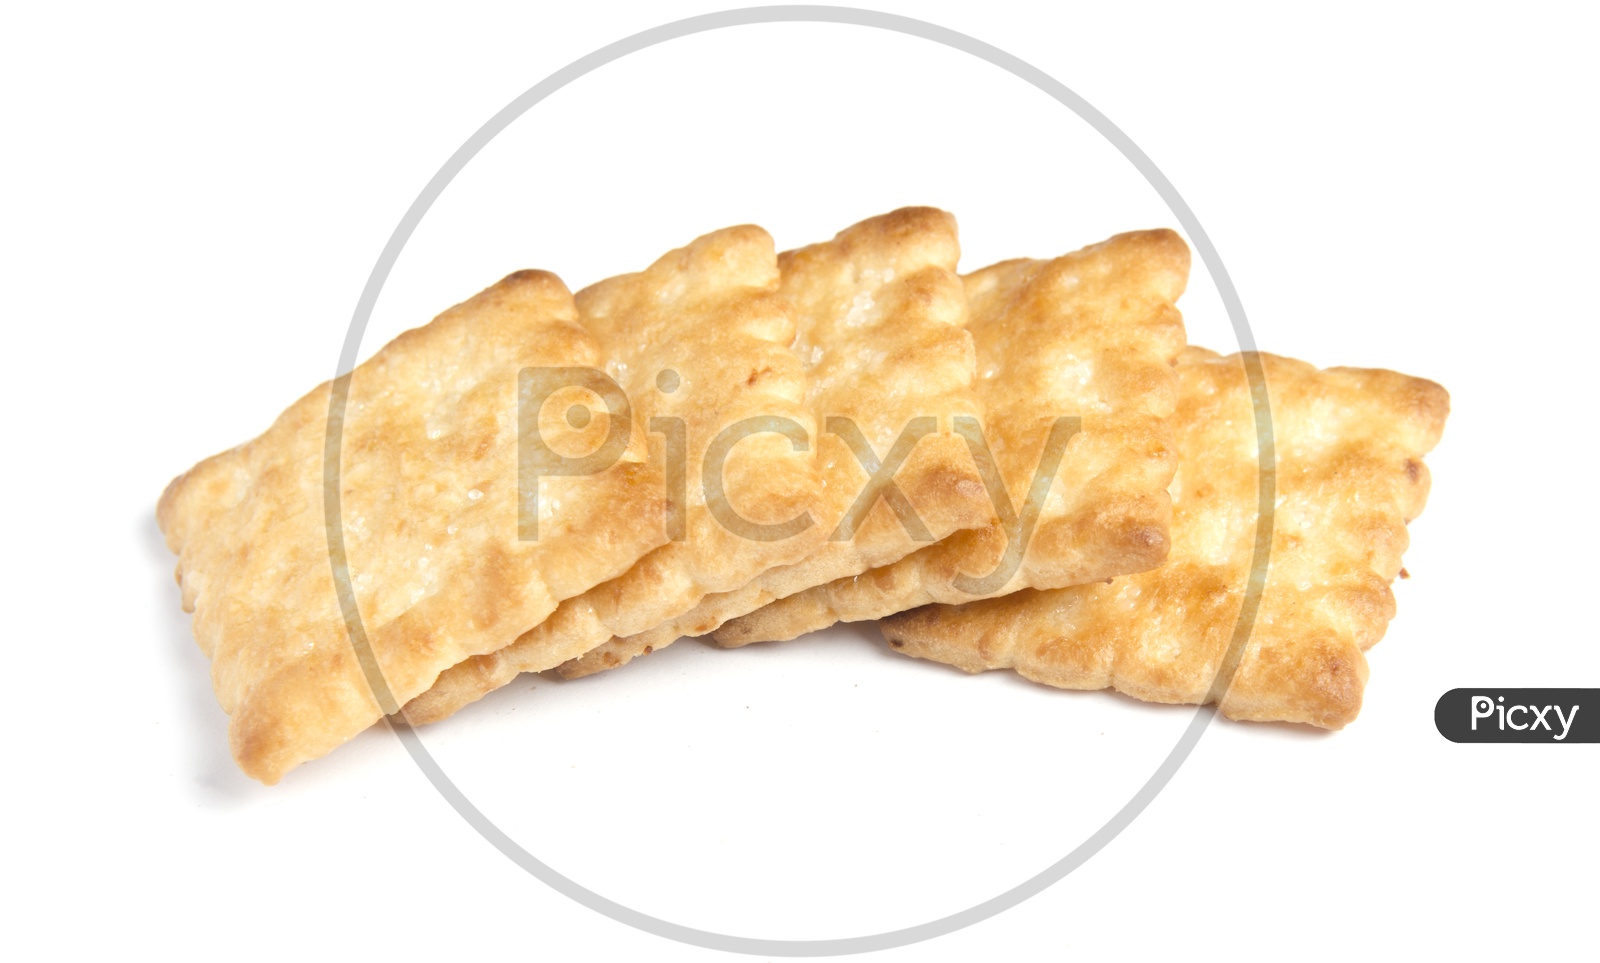 A bunch of cracker biscuits